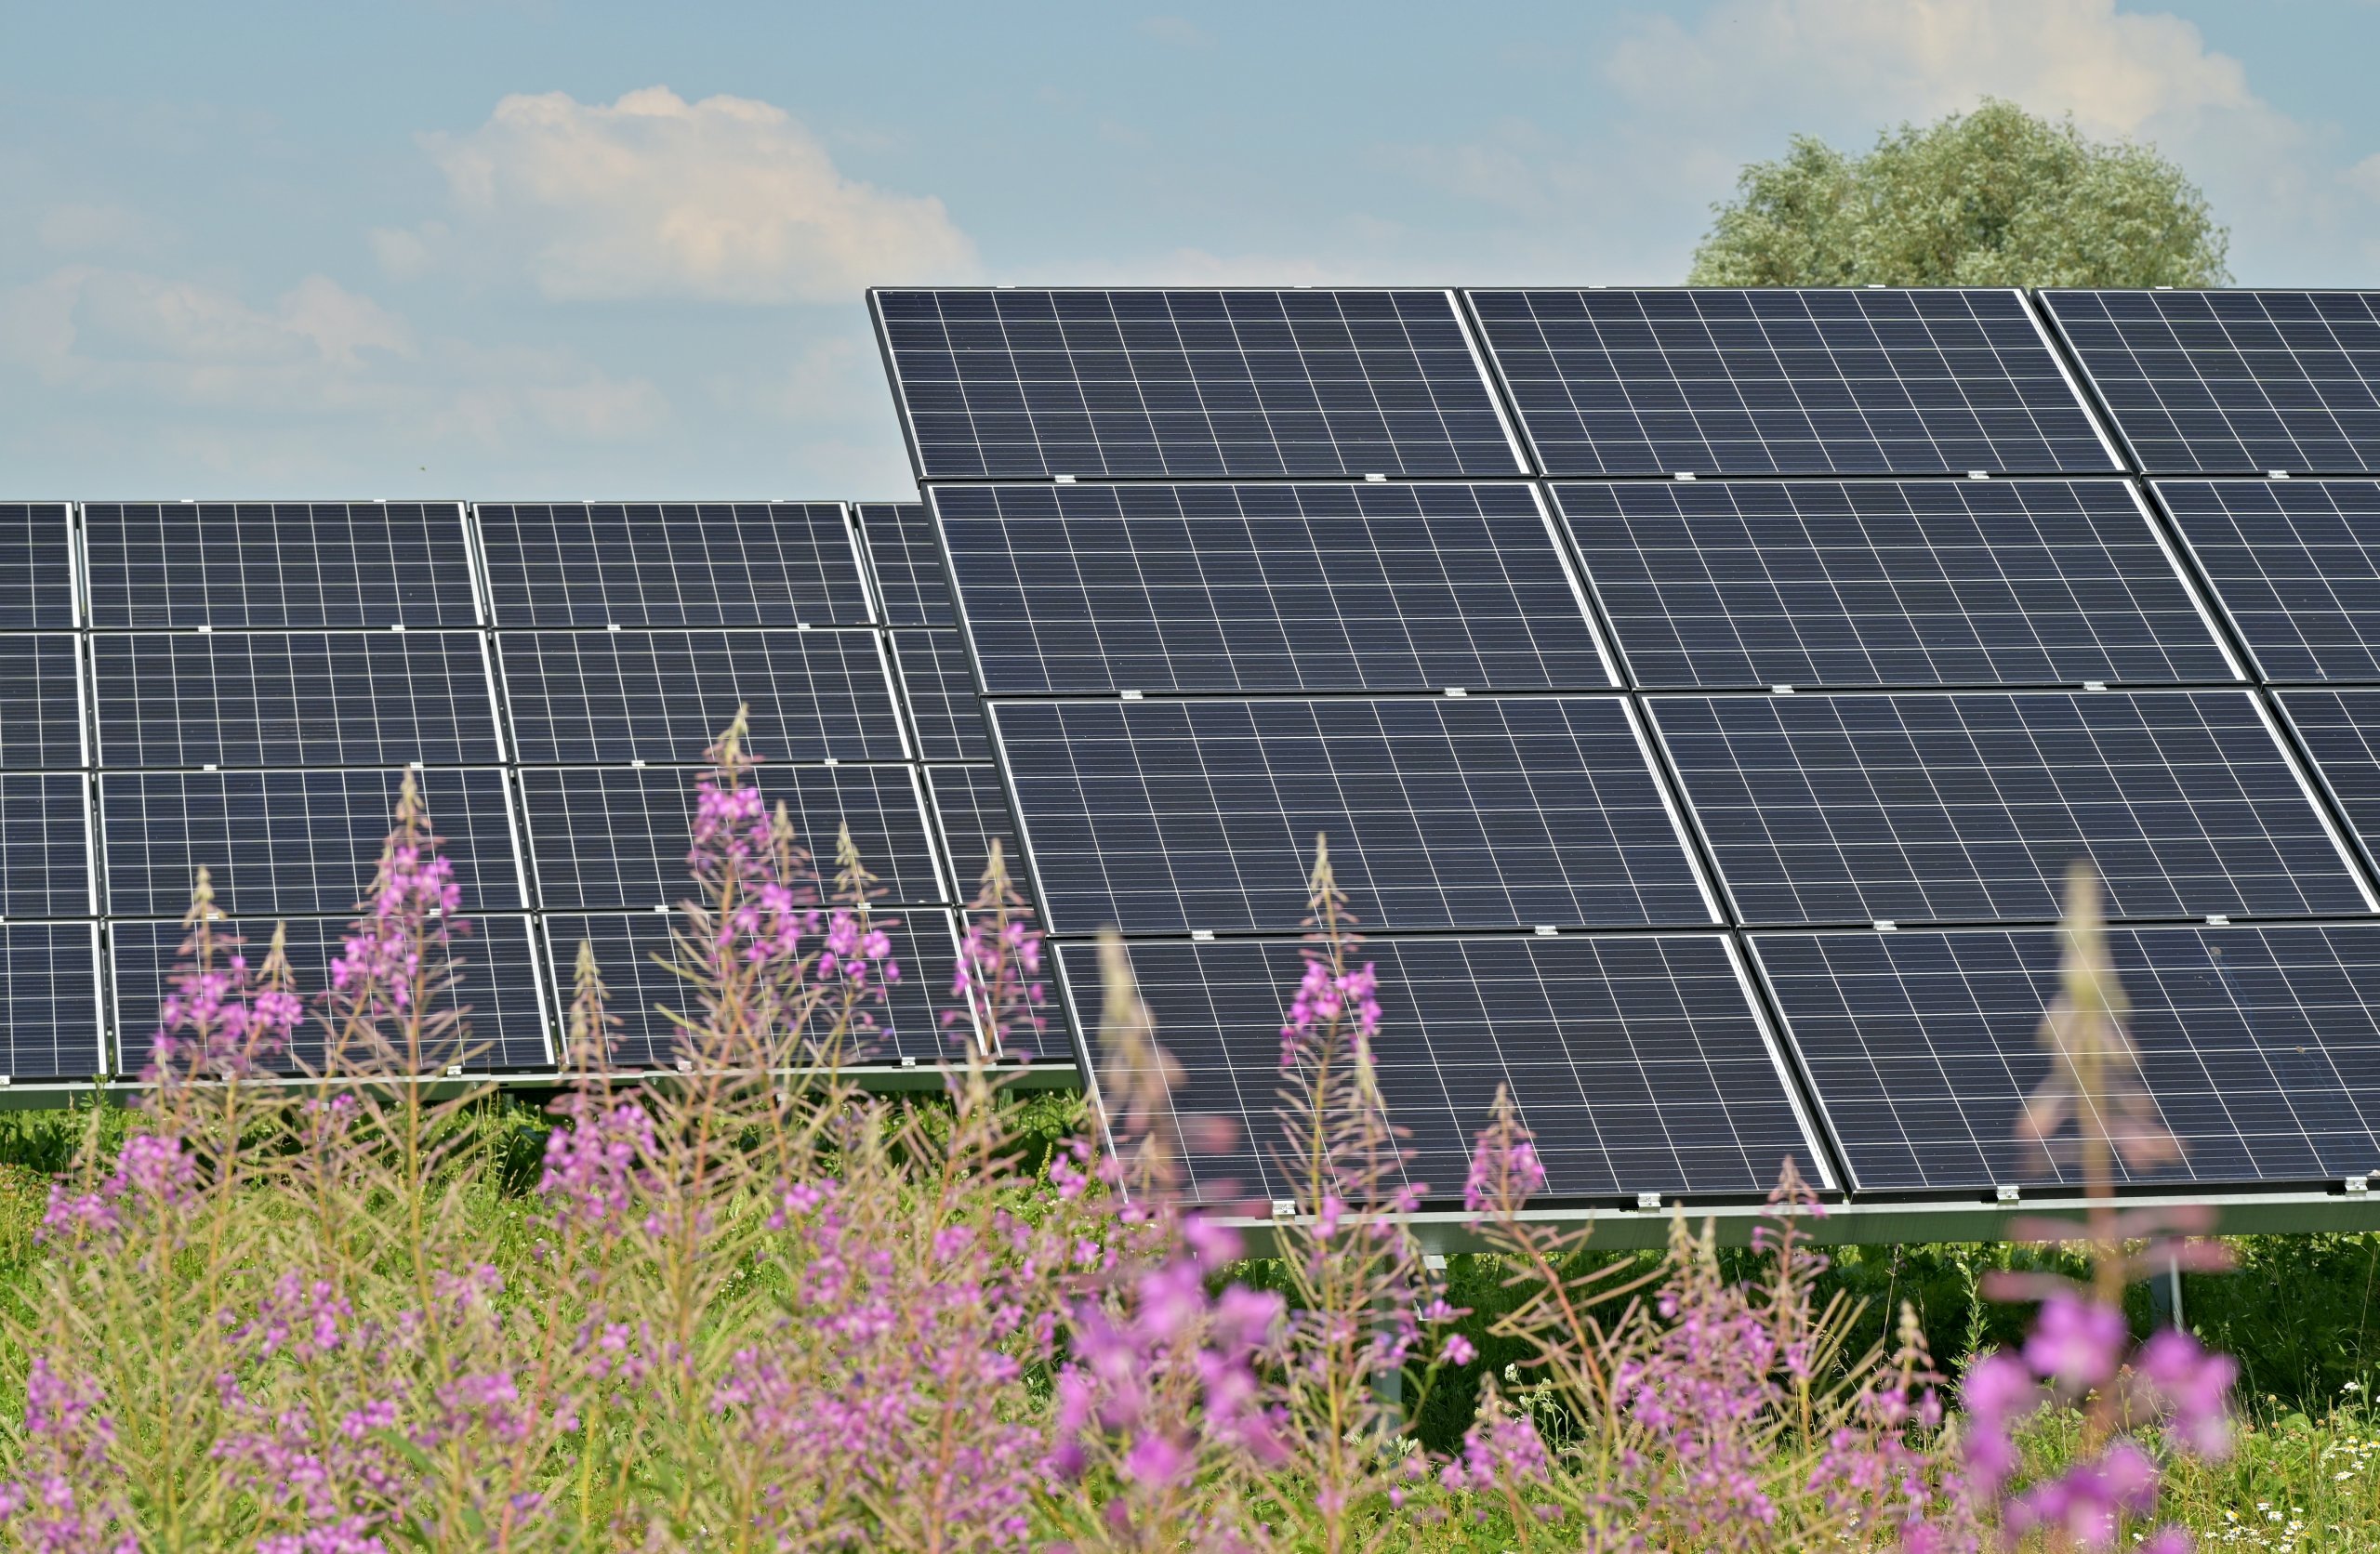 Solar panels in the field, field flowers foreground